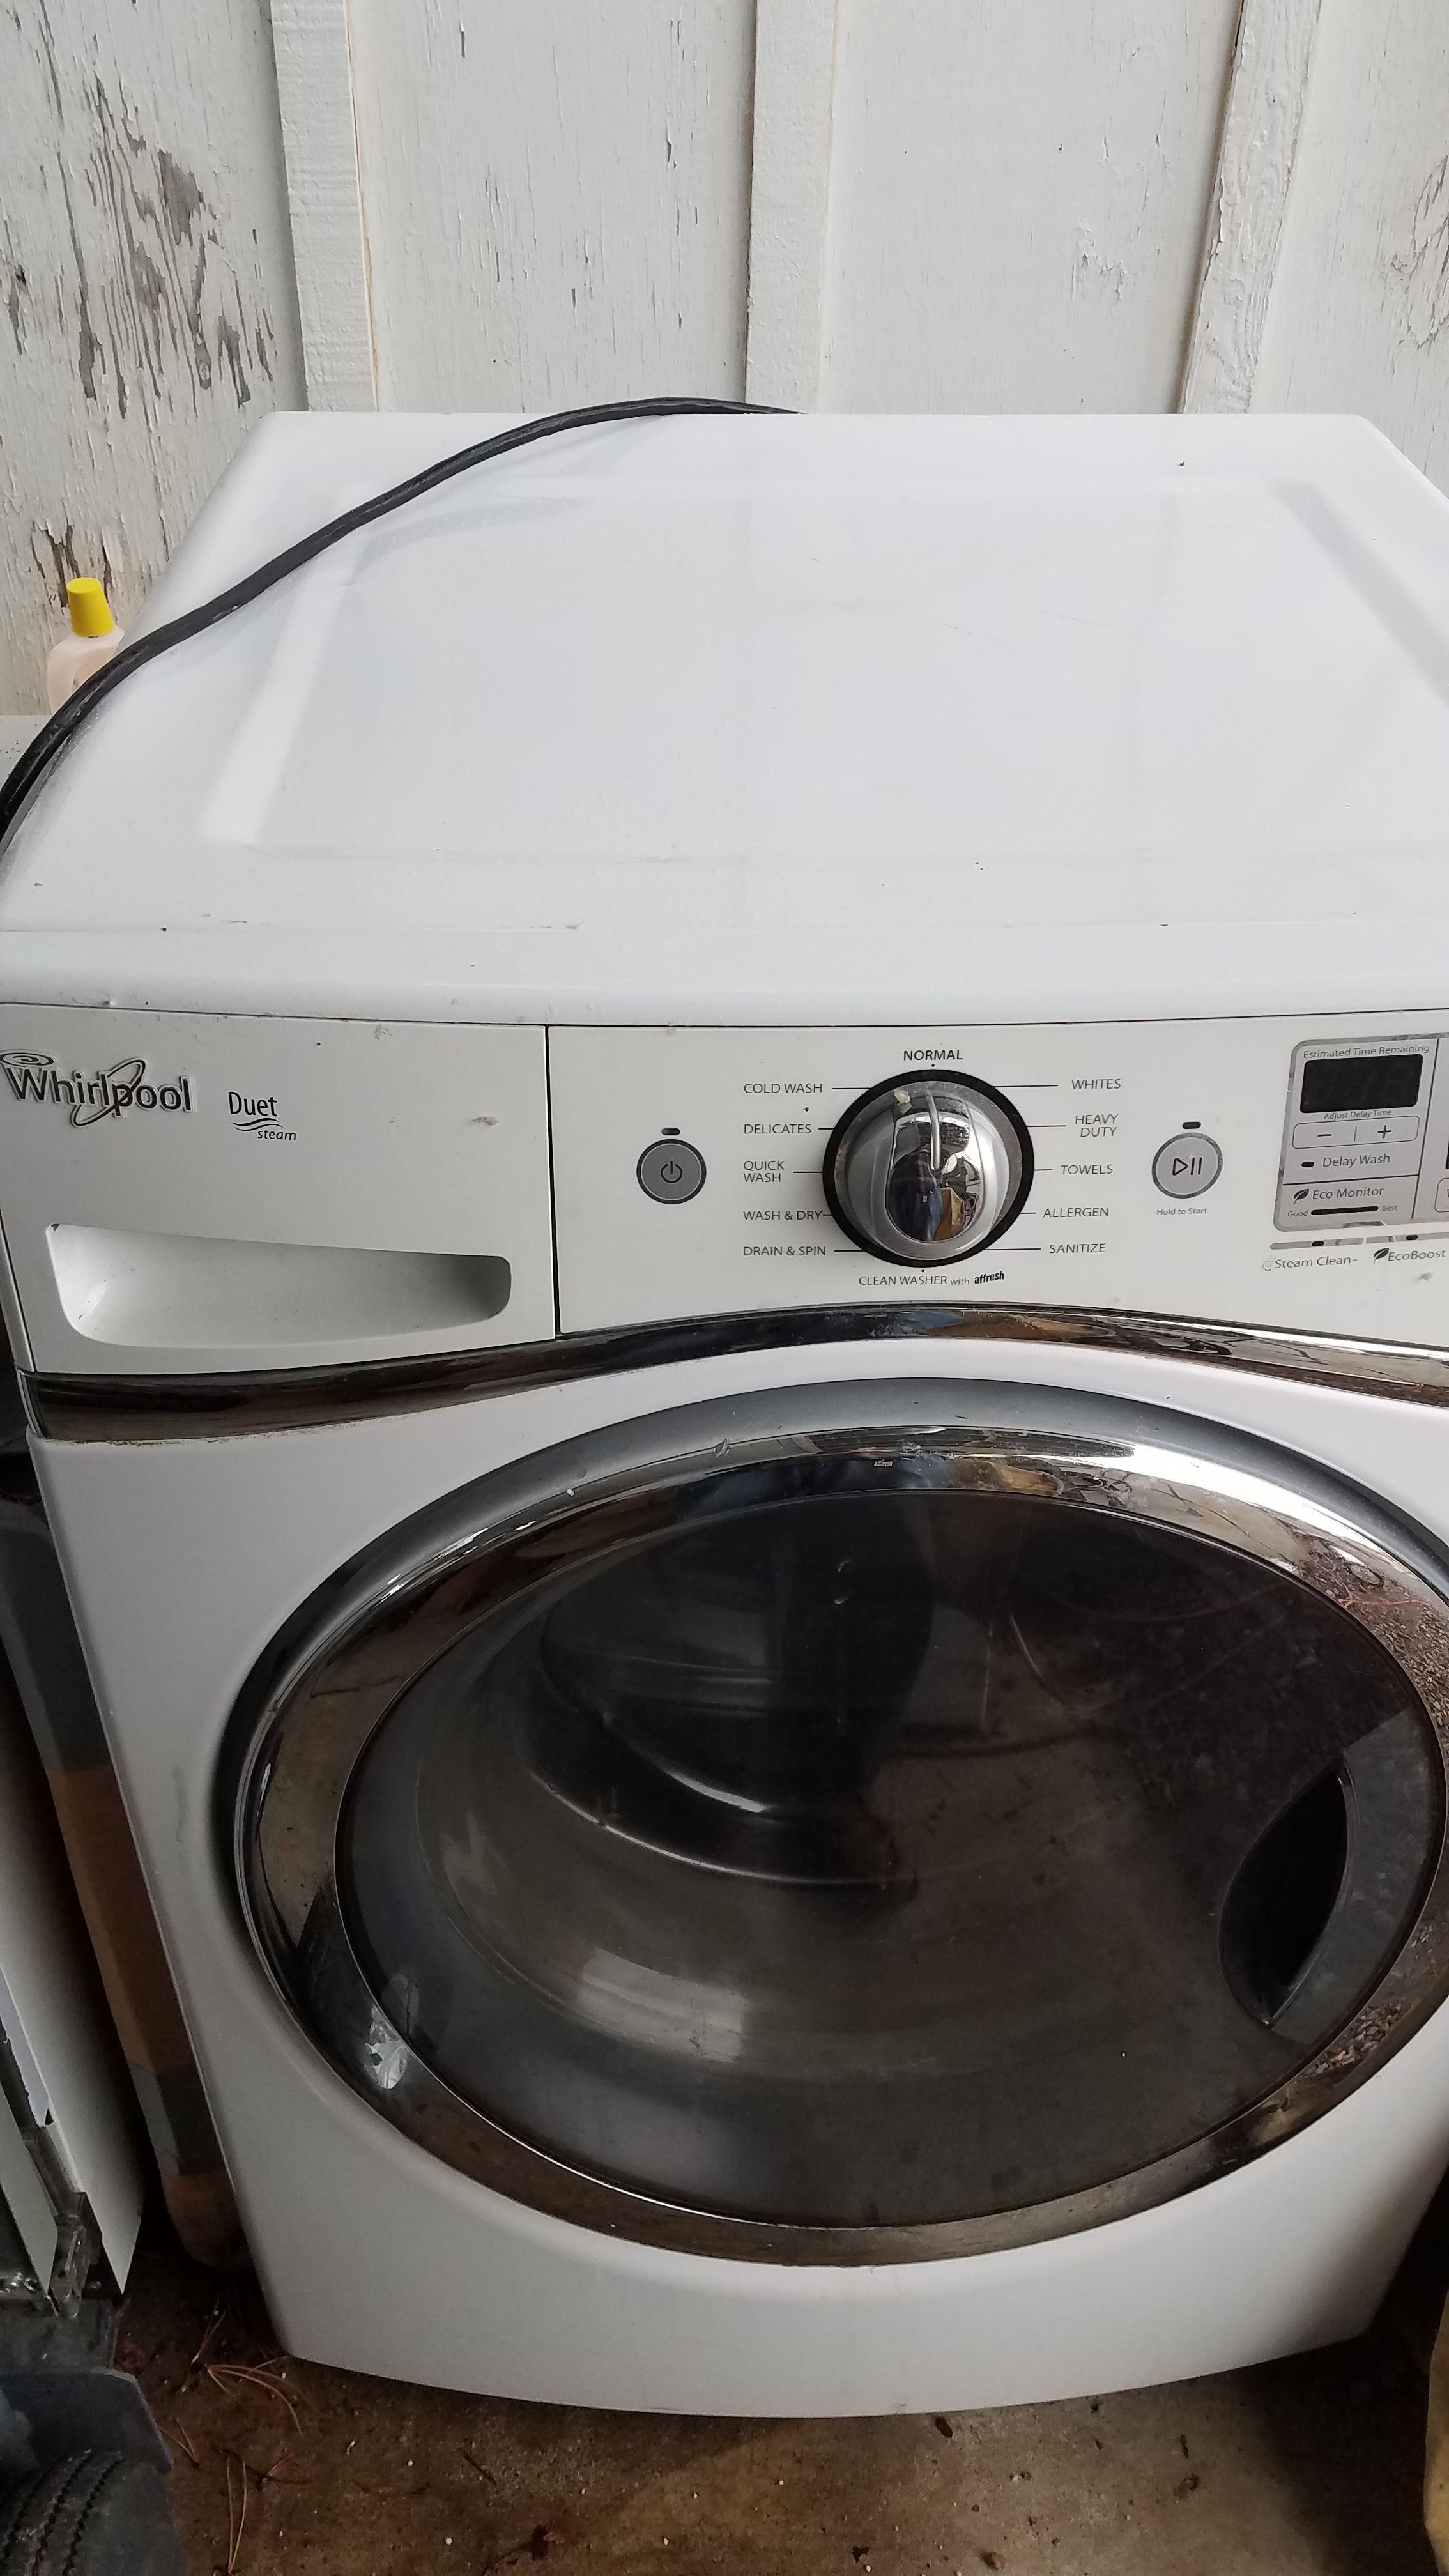 Whirlpool Duet Washer with Steam